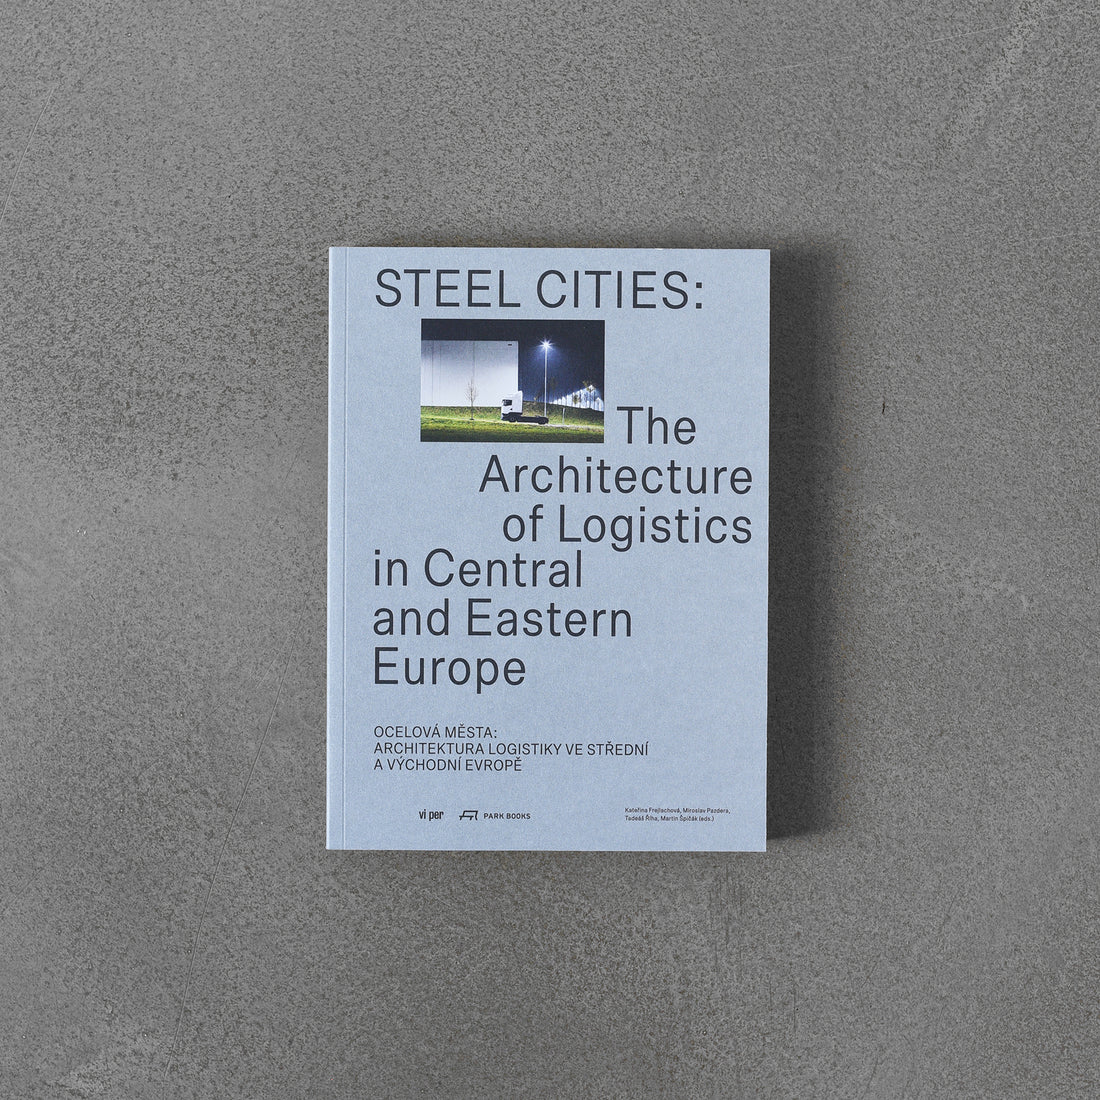 Steel Cities: The Architecture of Logistics in Central and Eastern Europe